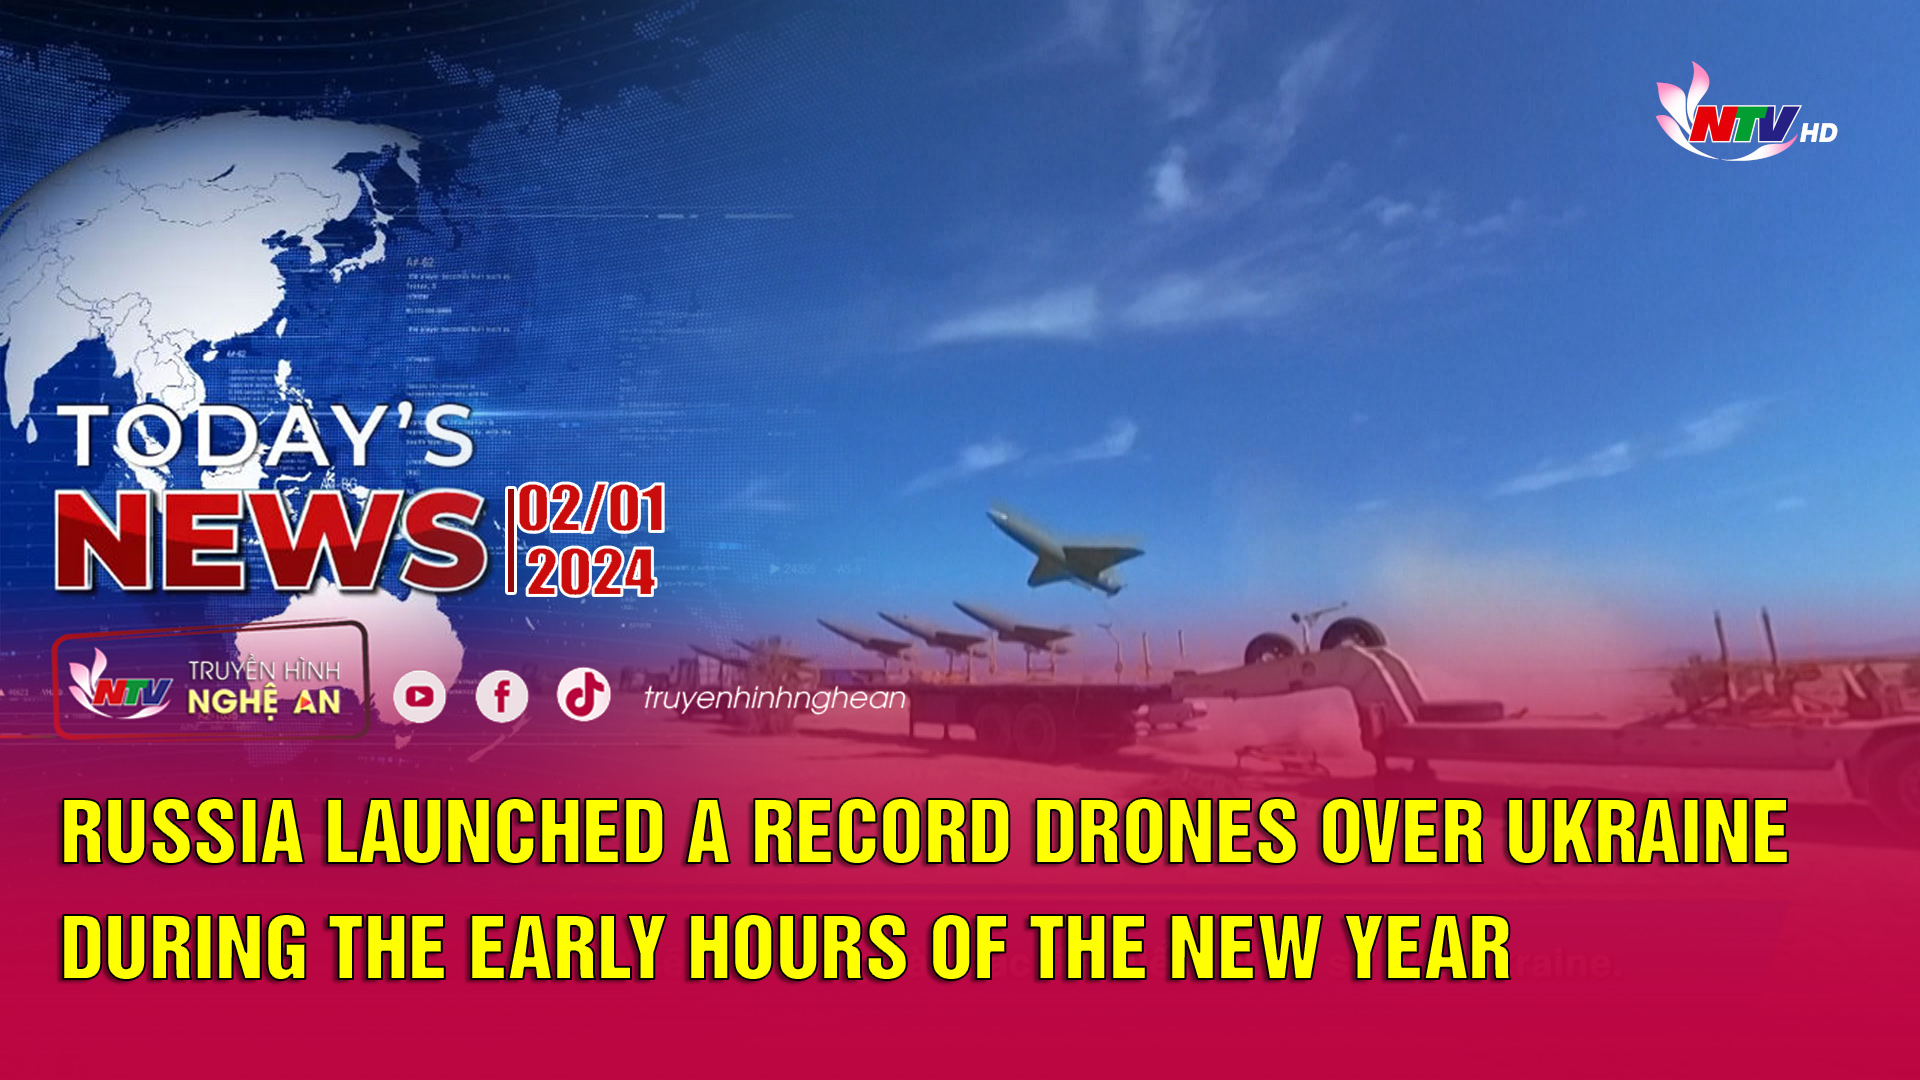 Today's News - 02/01/2024: Russia launched a record drones over Ukraine during the early hours of the new year.